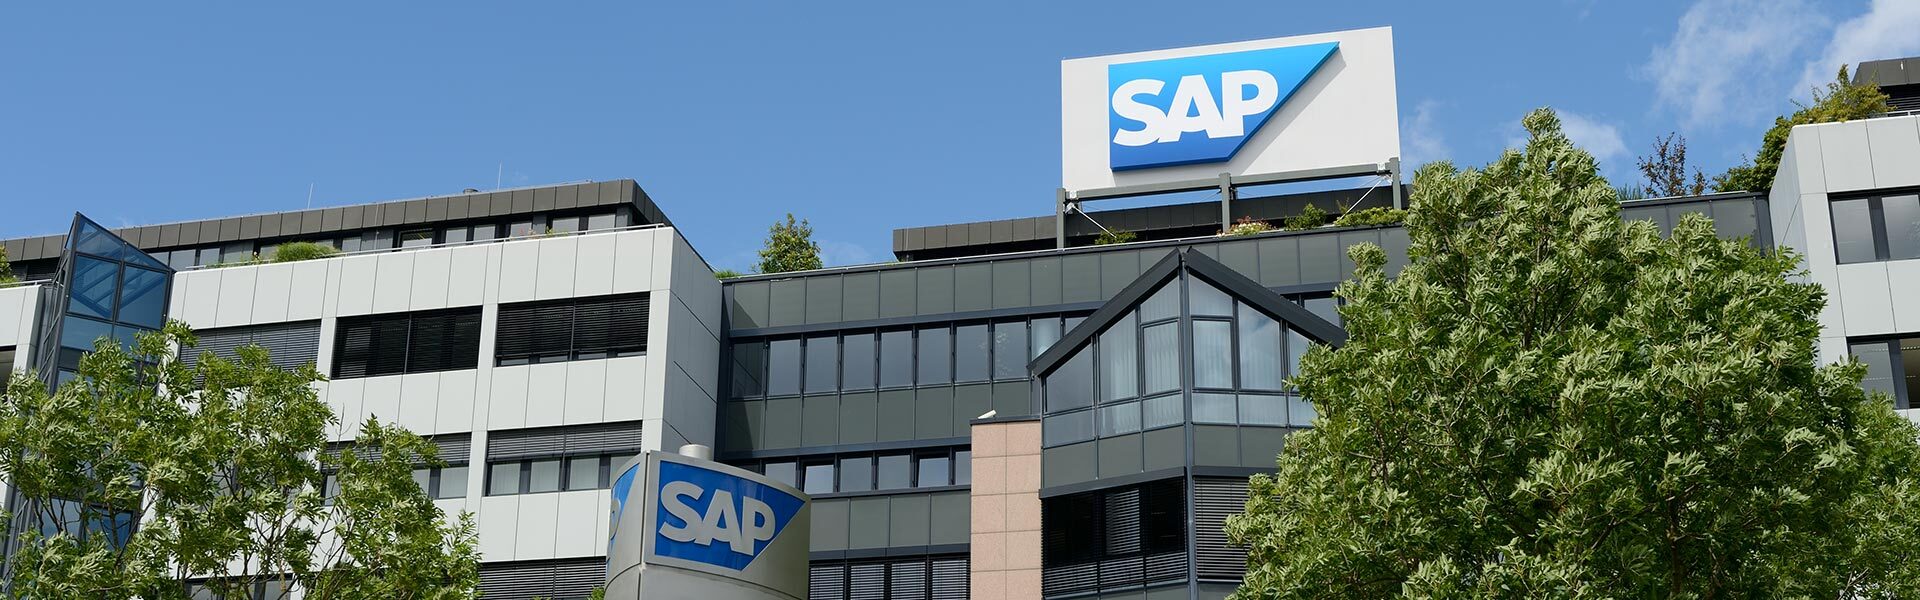 SAP Welcomes Resolution of Past Compliance Challenges with U.S. and South Africa Authorities